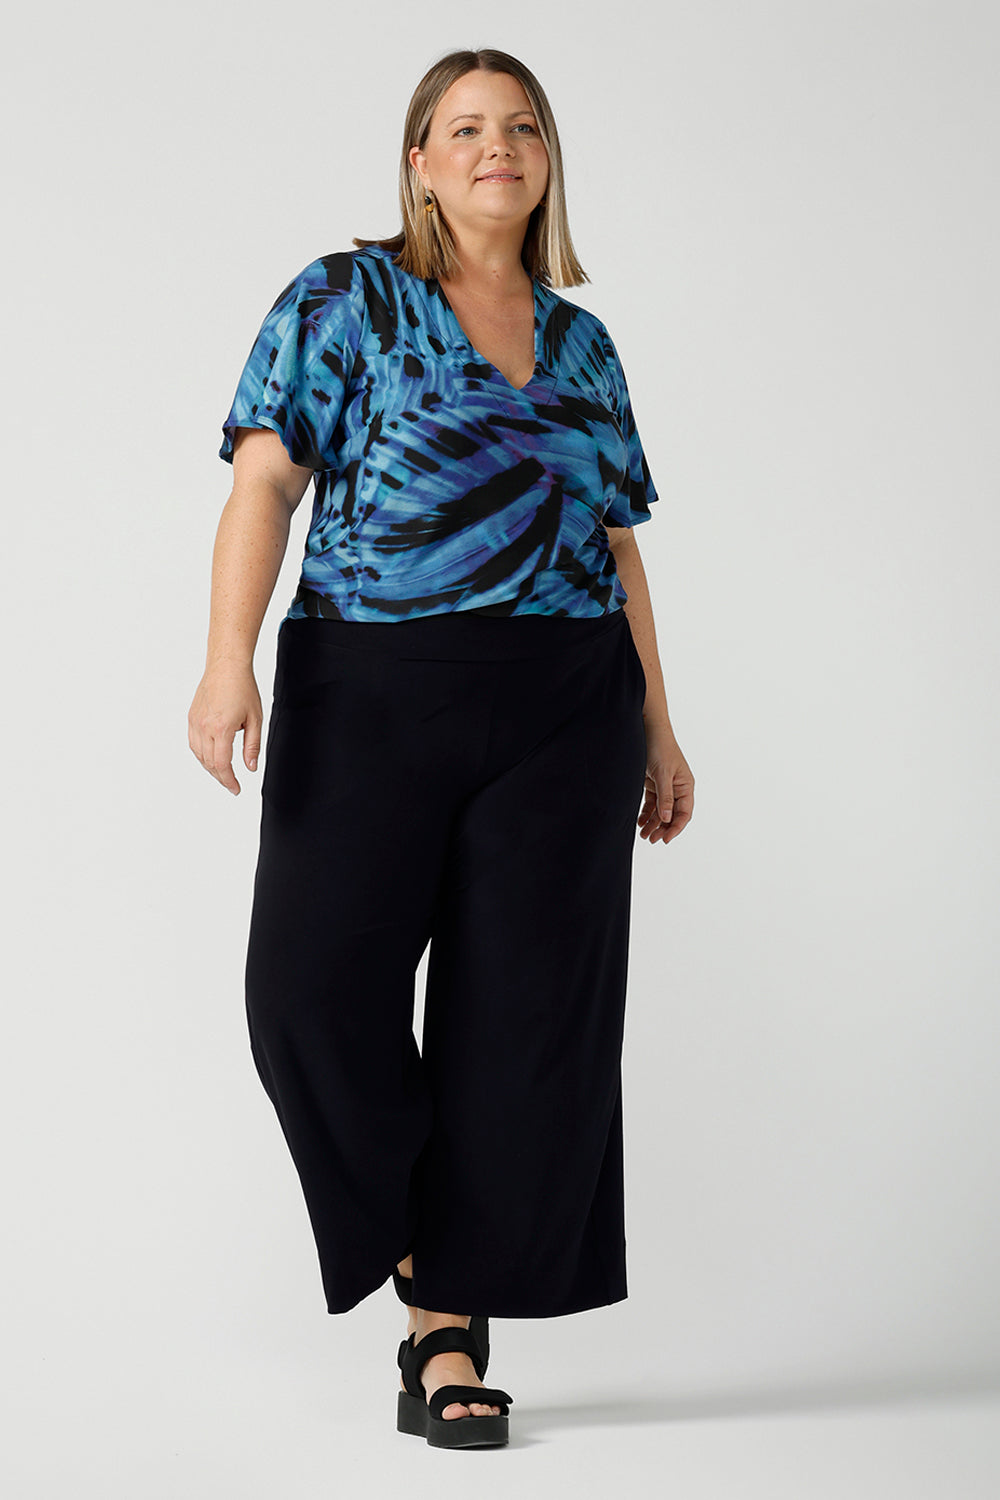 Curvy size 18 woman wears an Lila printed top in Flutter print. Digitally printed with cobalt, purple and black on a butterfly wing abstract print. Made in Australia for women 8 - 24. Styled back with navy jersey culottes.